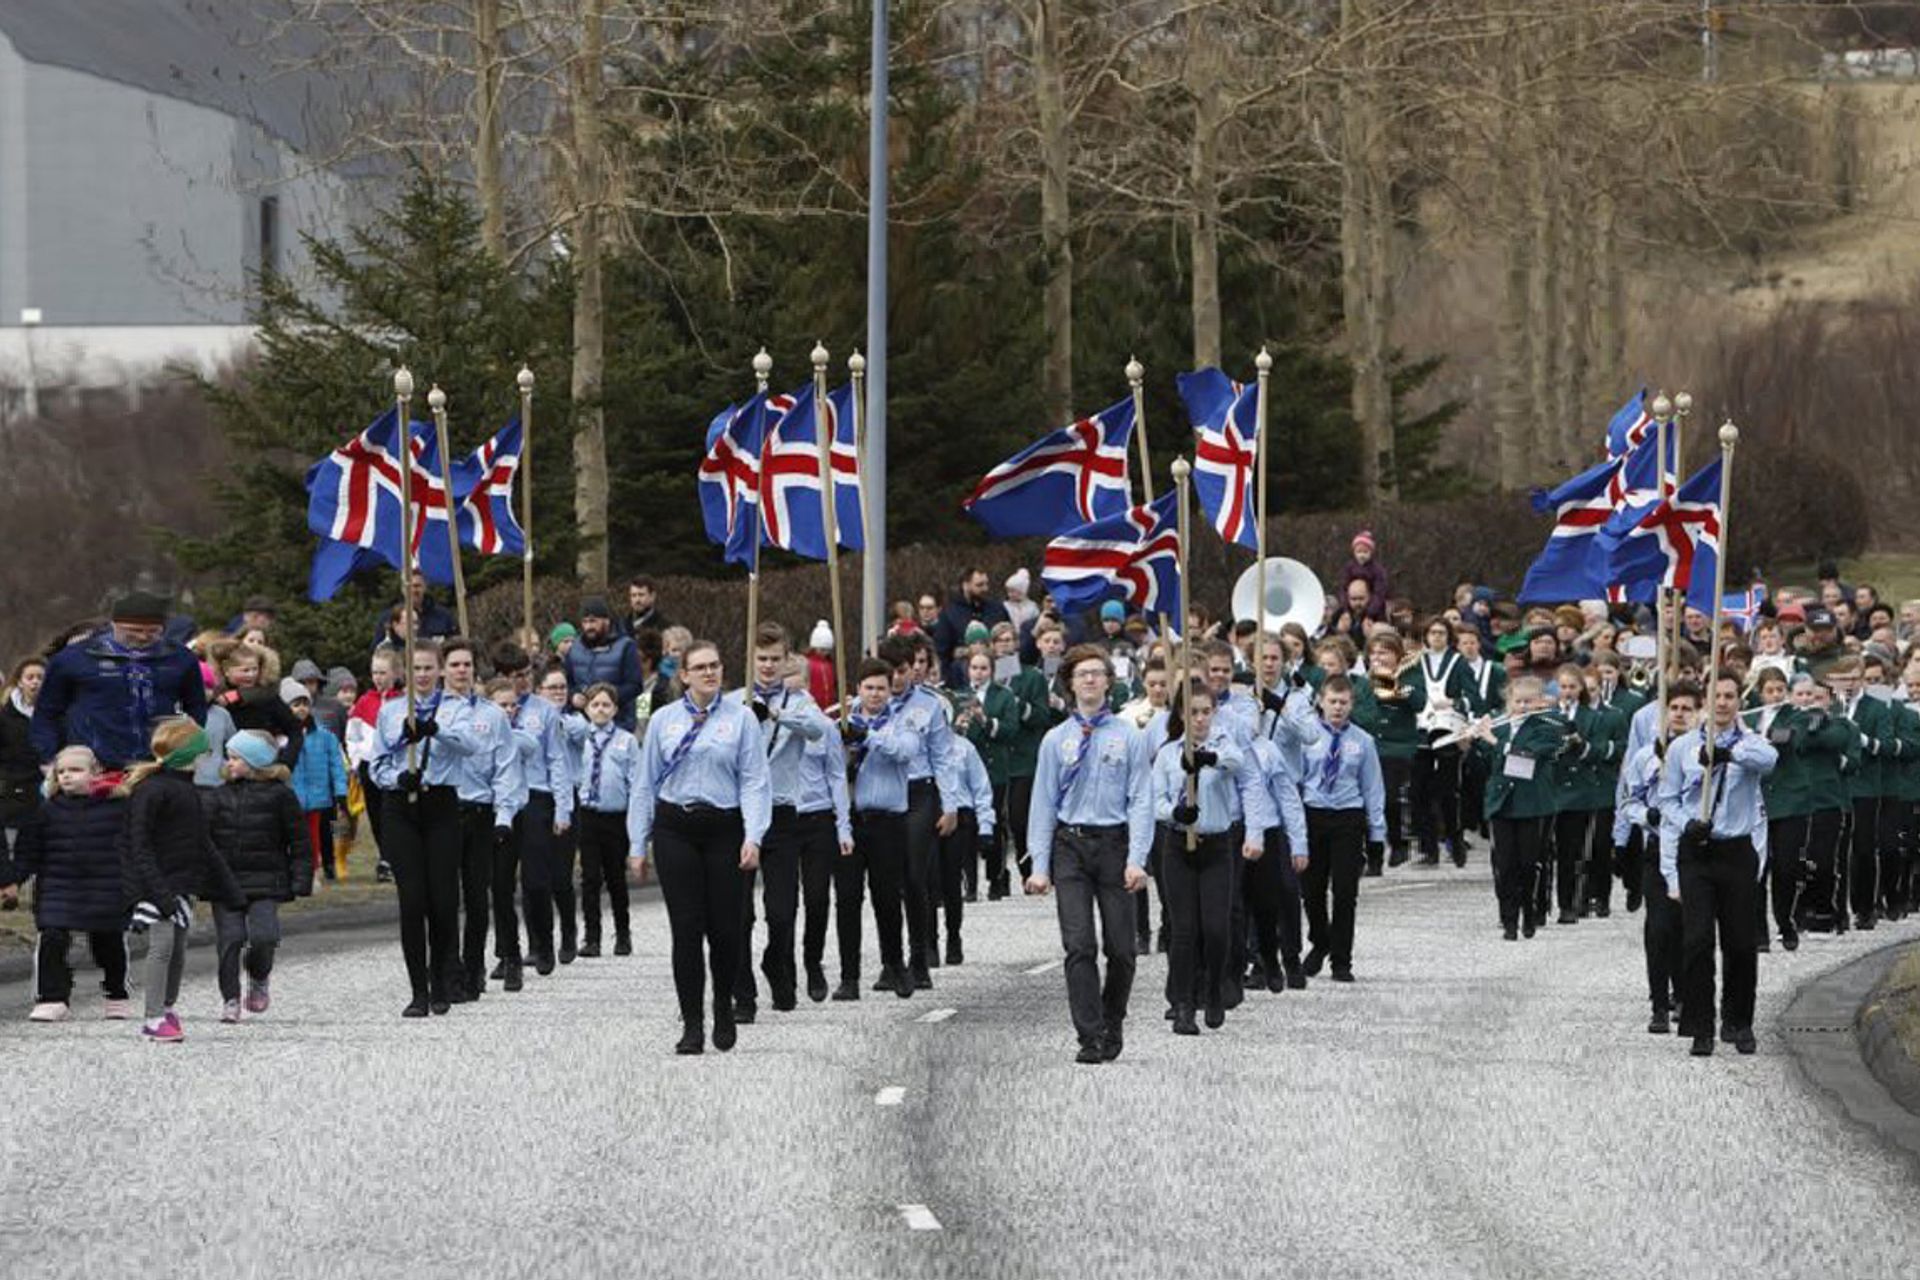 Icelanders celebrating the first day of summer in Iceland 